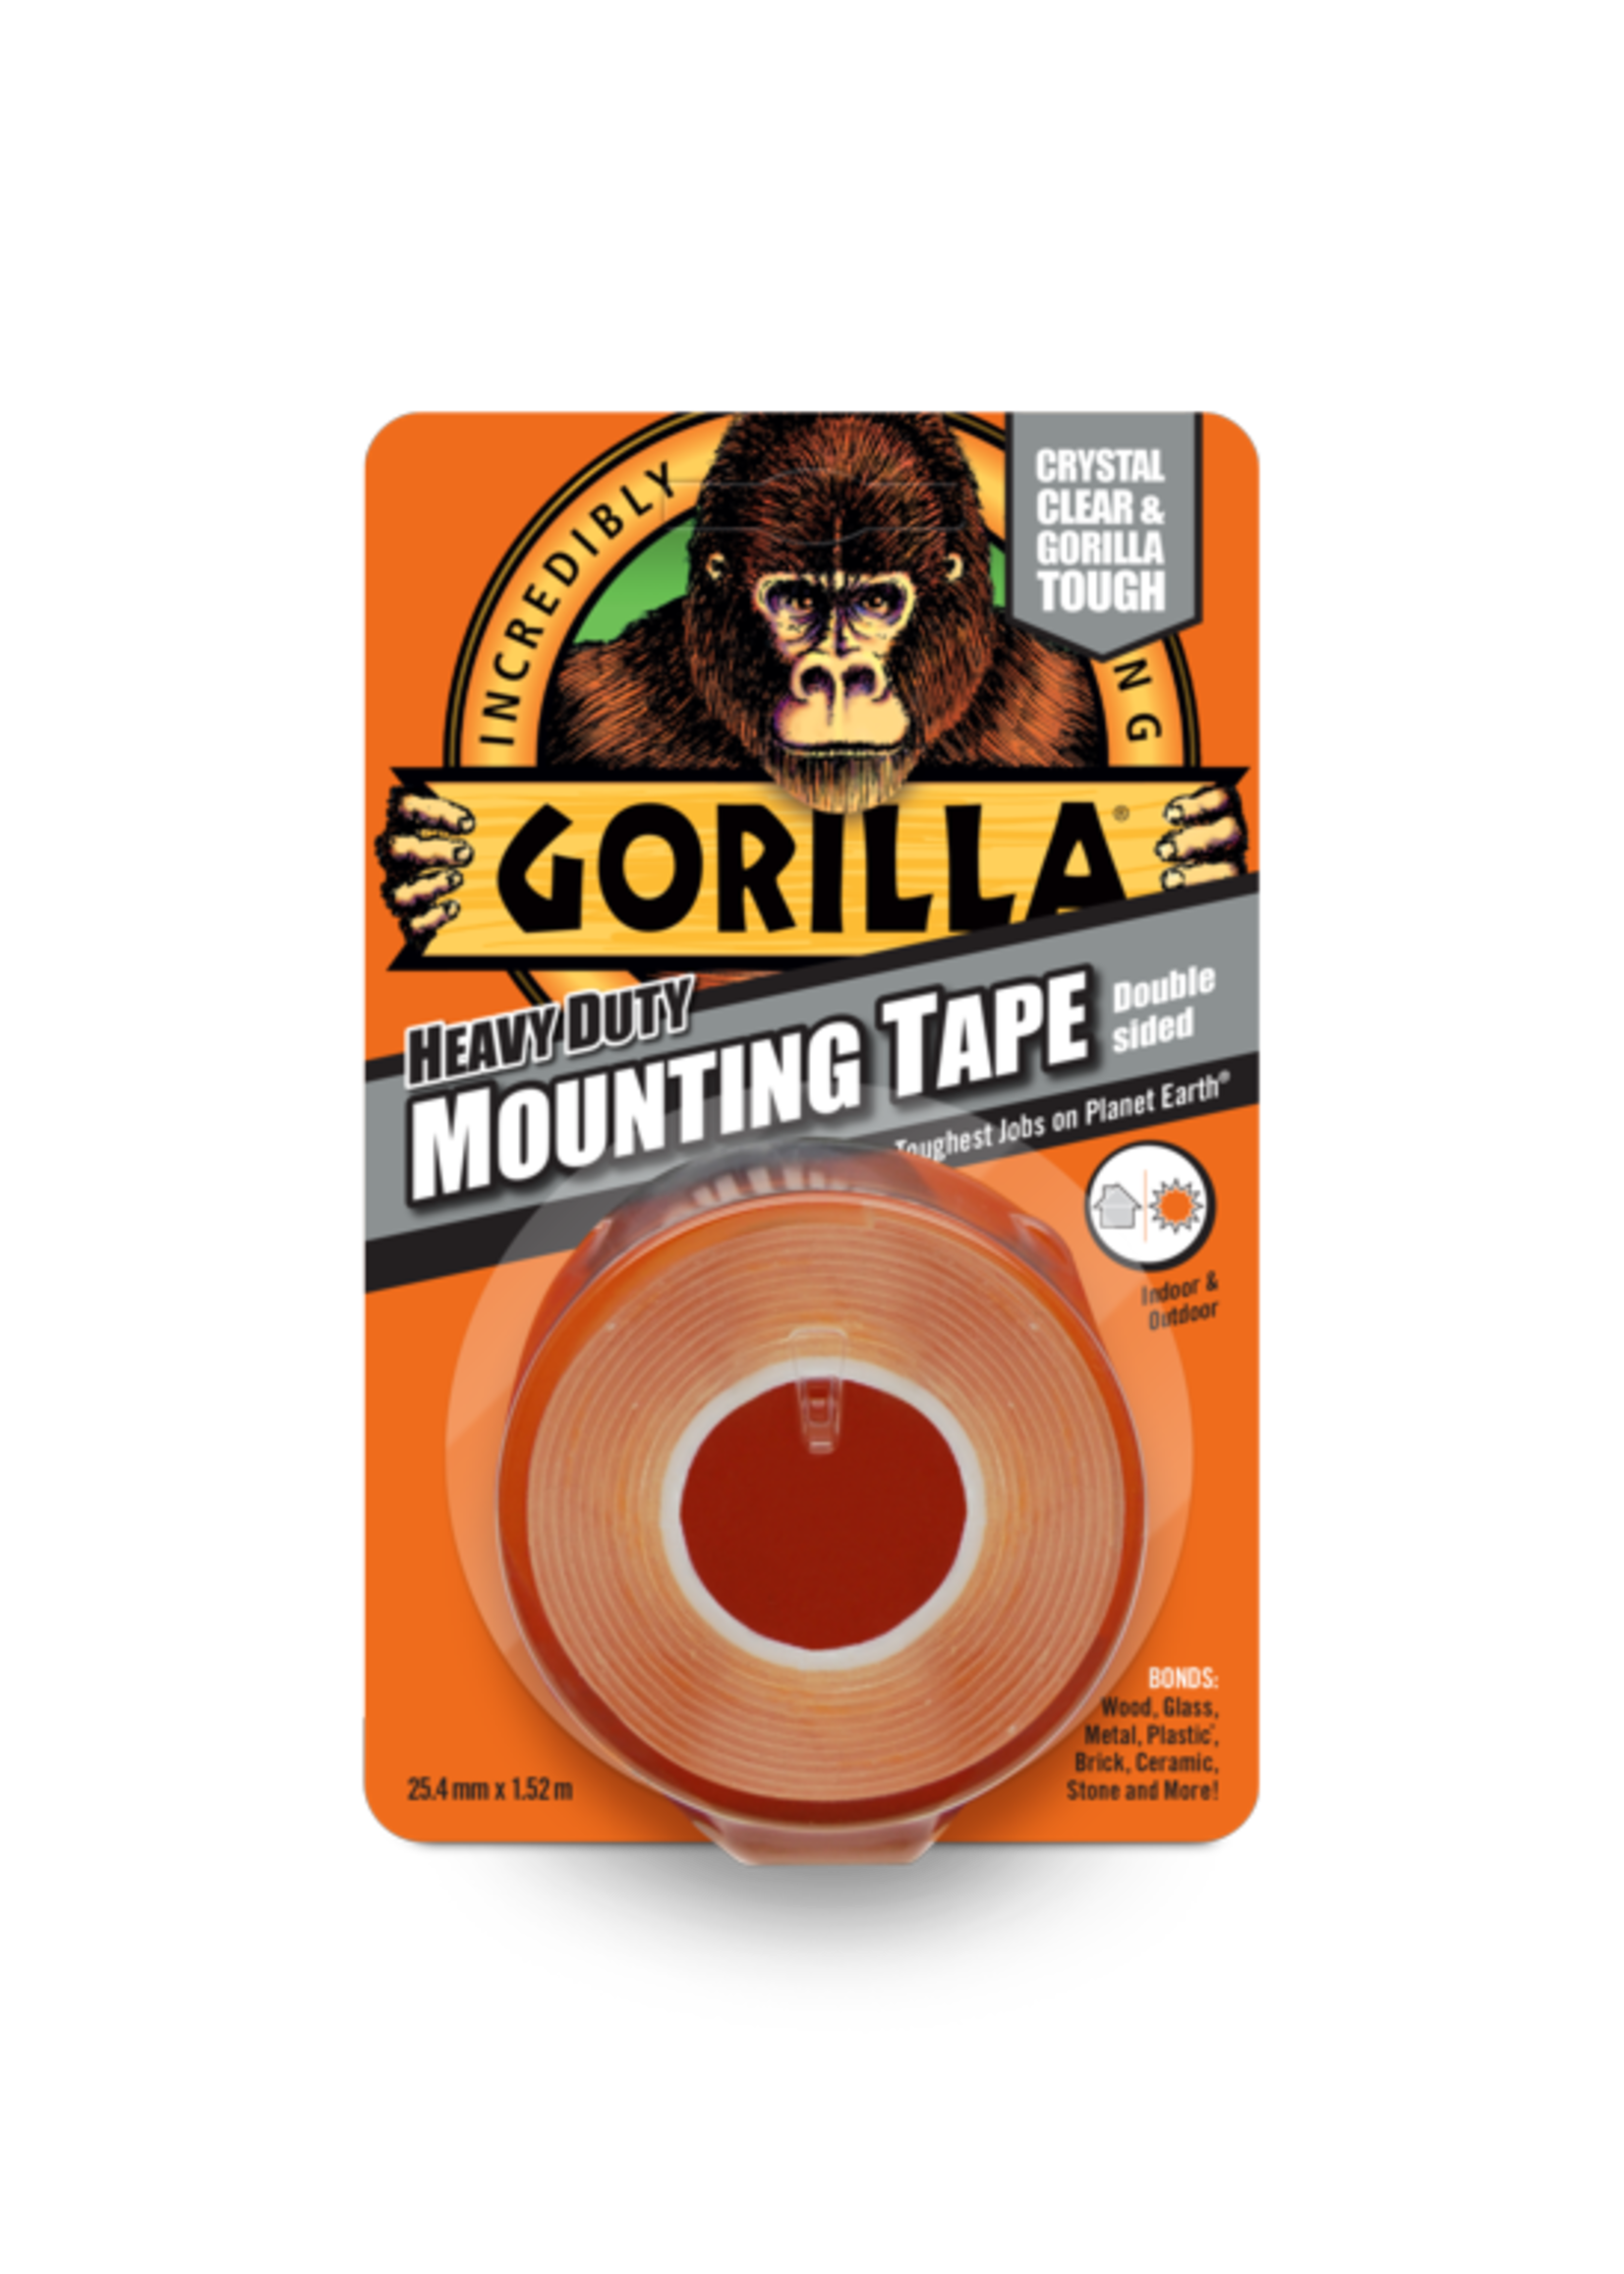 Gorilla Gorilla Heavy Duty Double Sided Mounting Tape 1.5m Clear